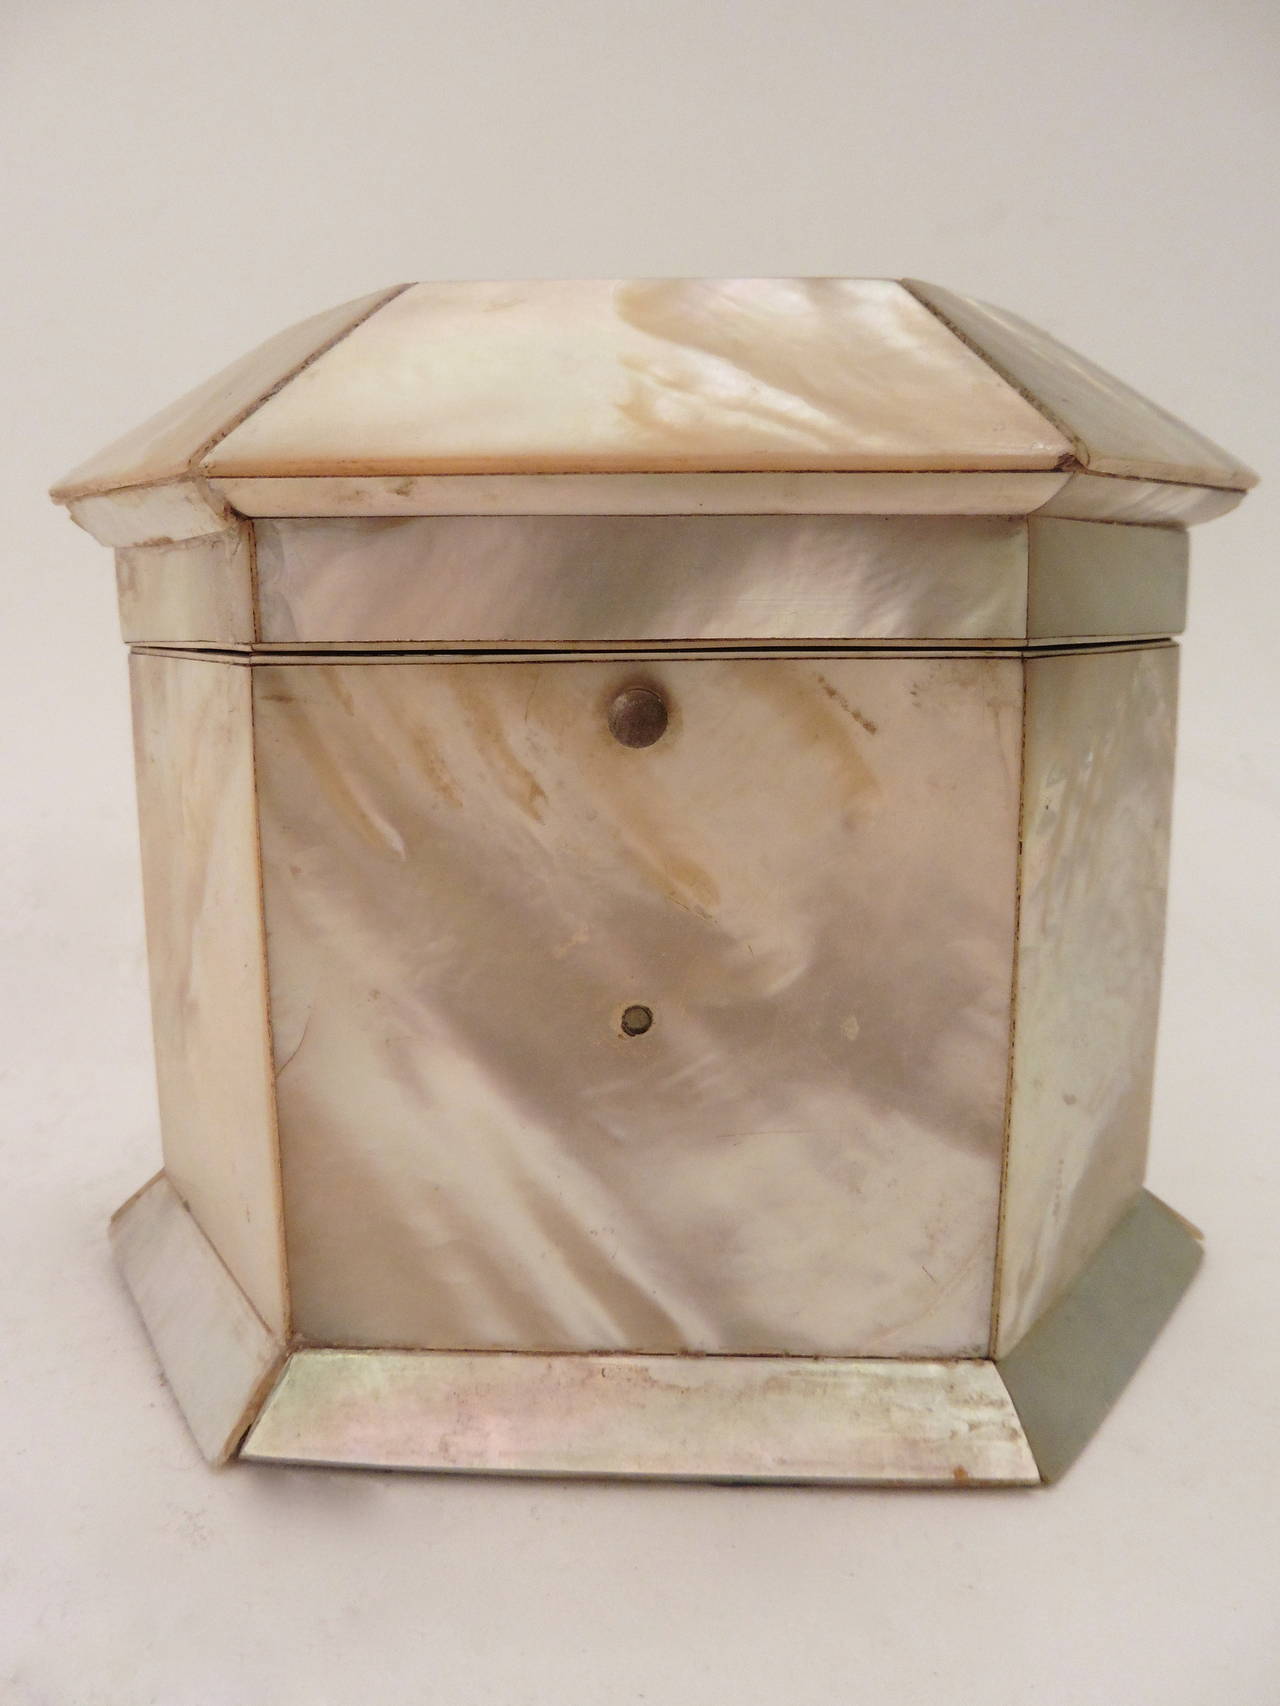 A delightful English Victorian mother-of-pearl veneered tea caddy with an inner tortoiseshell lid topped by a small circular mother-of-pearl handle. The inside lined with patterned orange silk, circa 1850.